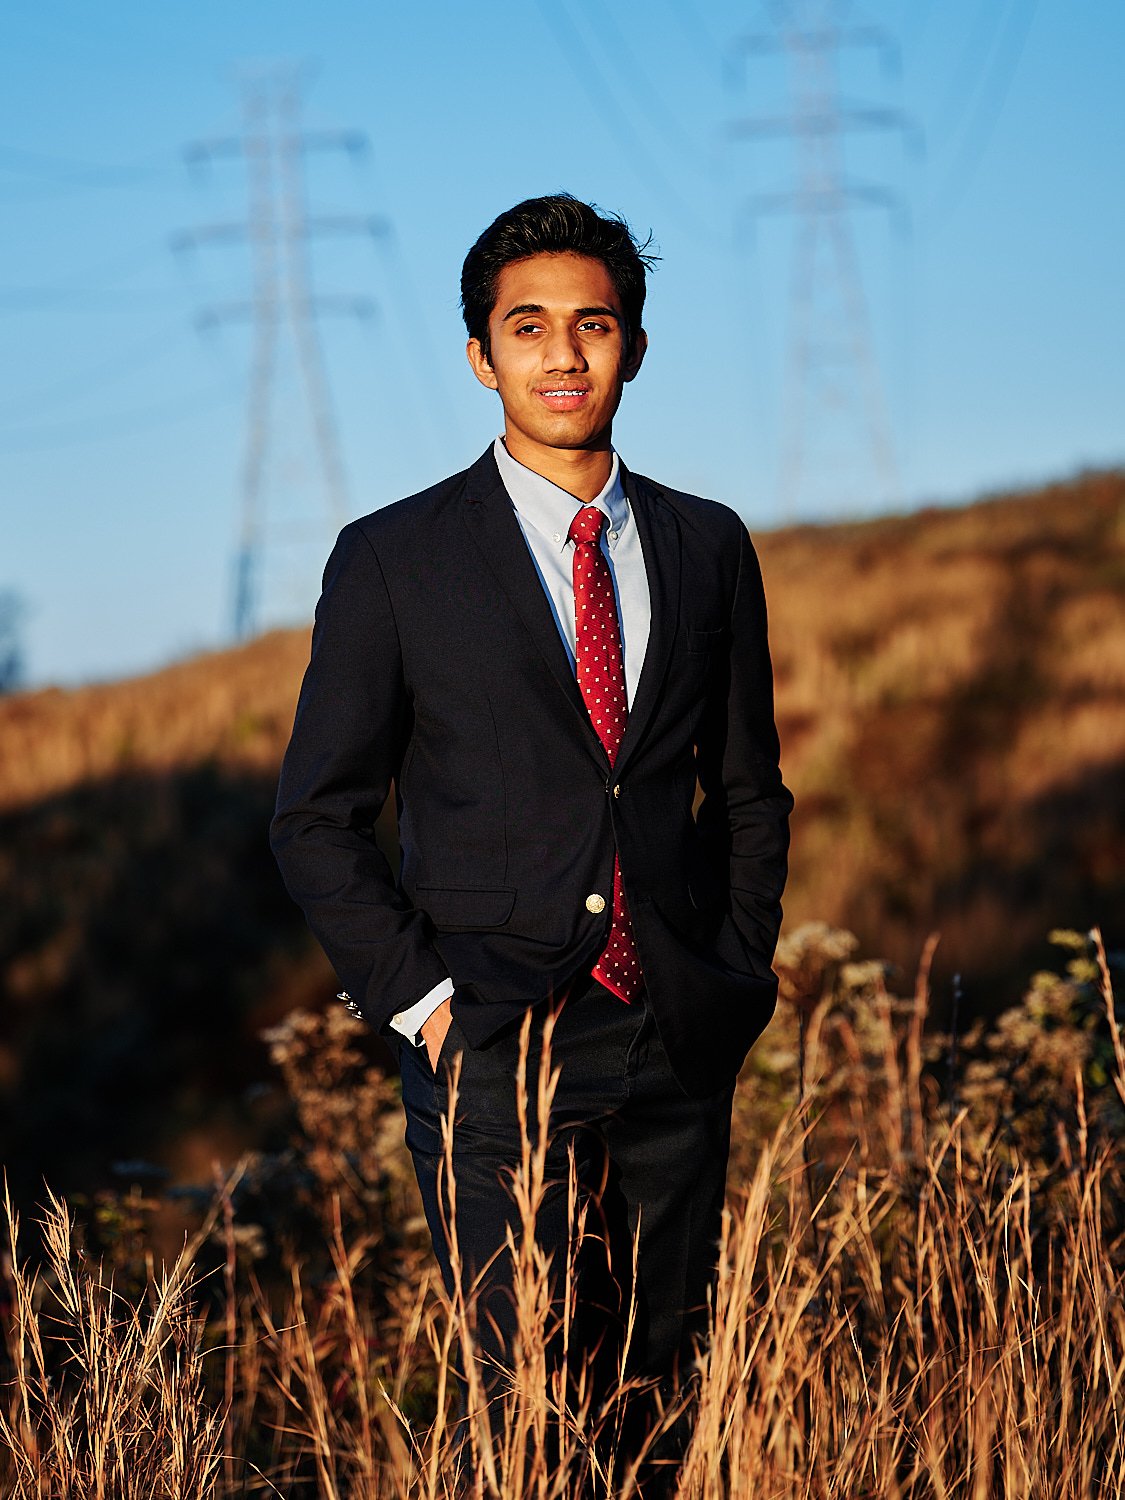  THE WOODLANDS, TEXAS - APRIL 2023: a handsome 17-year-old guy in a blue suit and red tie is posing for high school senior portraits for yearbook and wall art. He has shiny black hair and brown eyes. 